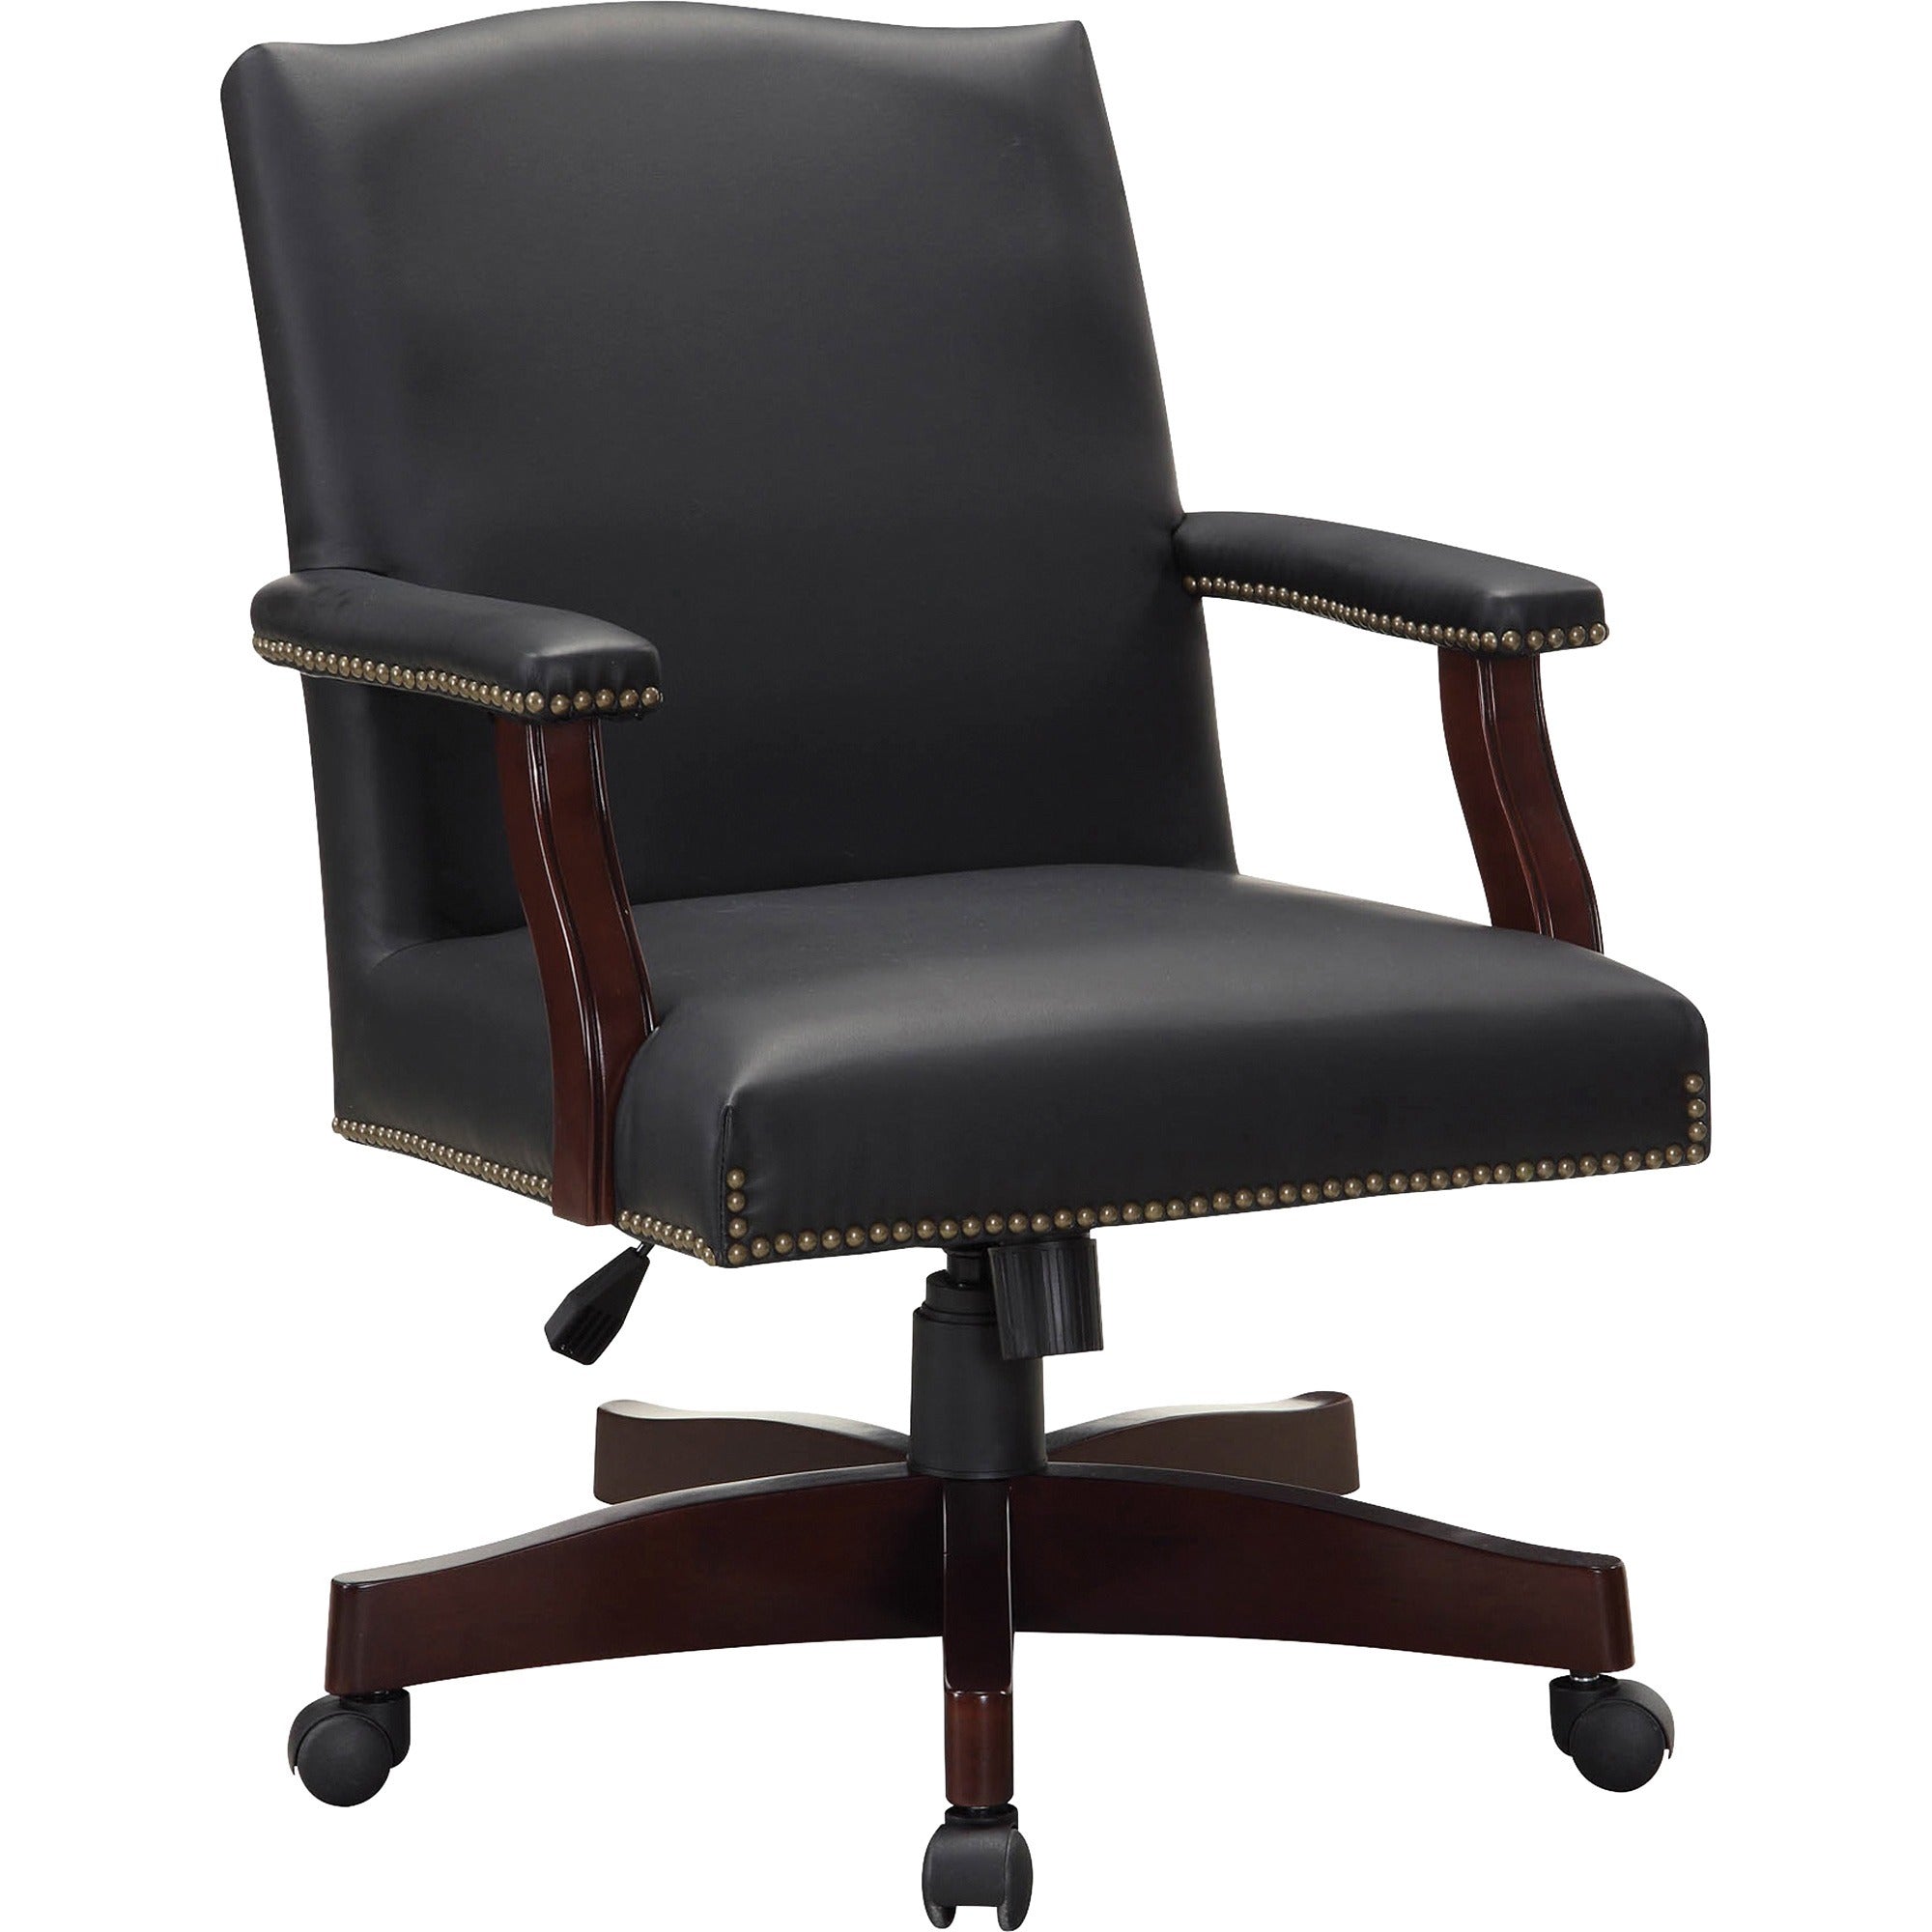 Lorell Traditional Executive Office Chair - Black Bonded Leather Seat - Black Bonded Leather Back - Mid Back - 5-star Base - 1 Each - 